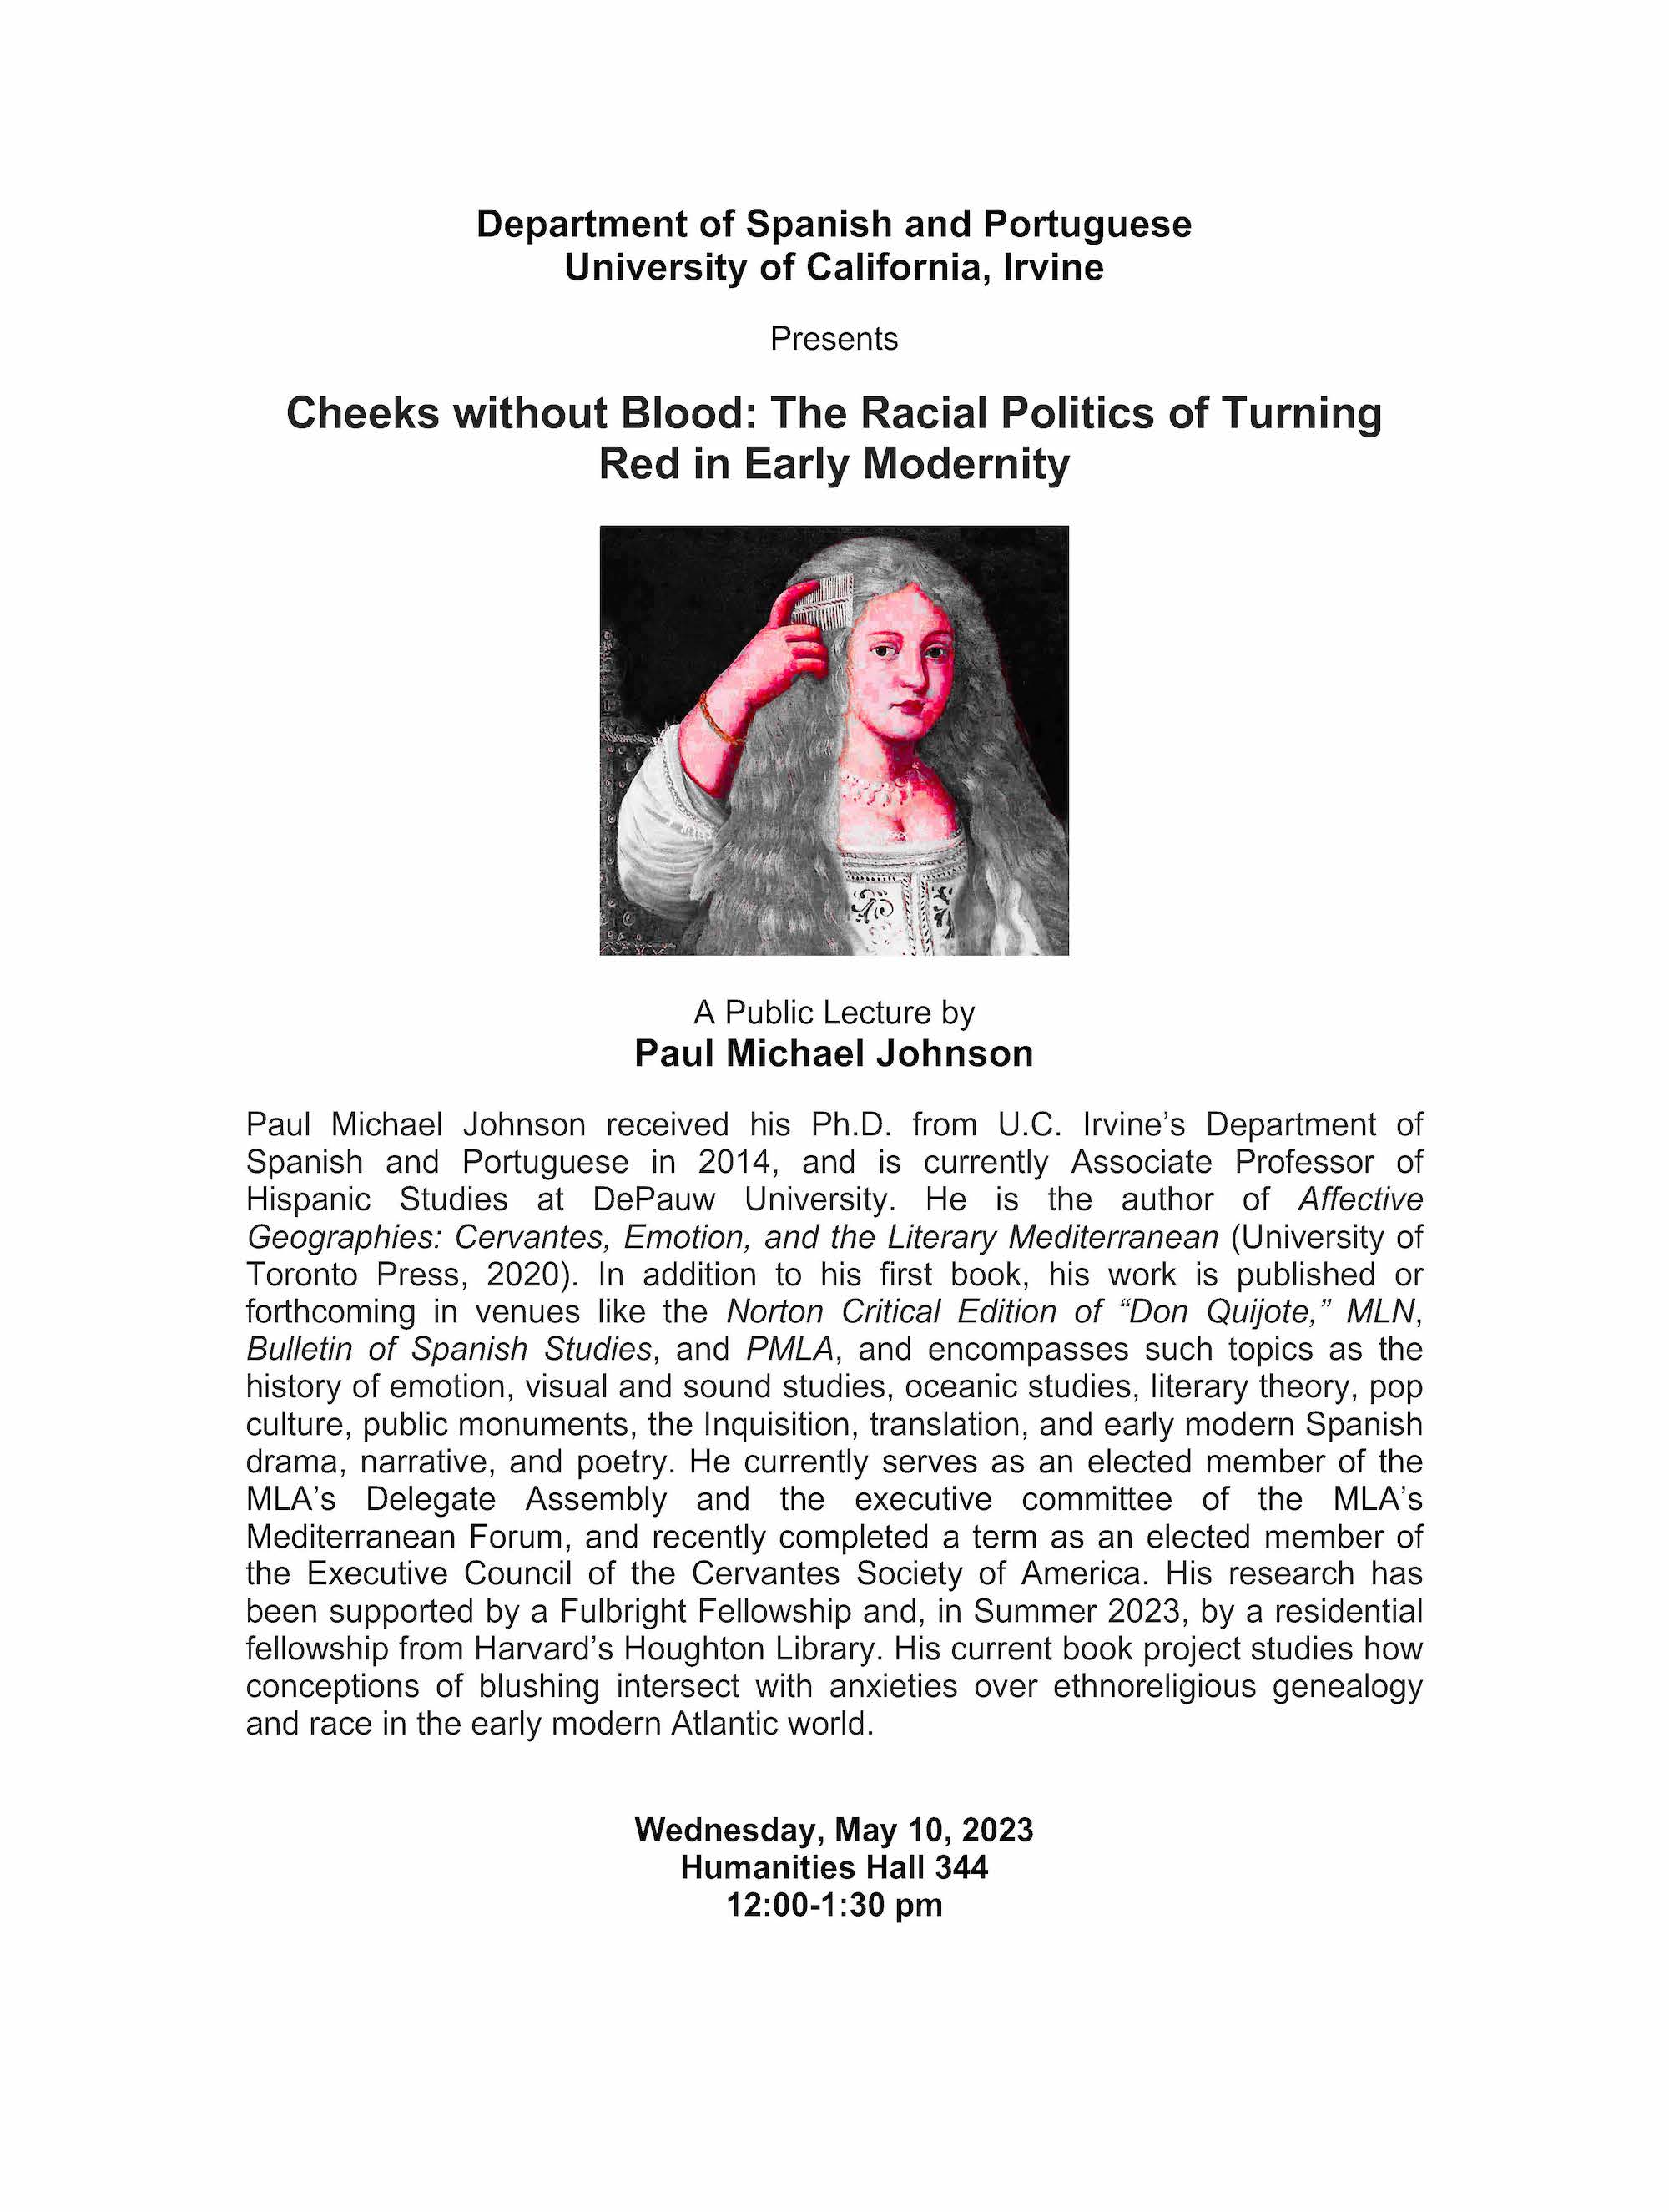 Paul Johnson UCI Lecture on May 10 at 12pm in HH 344